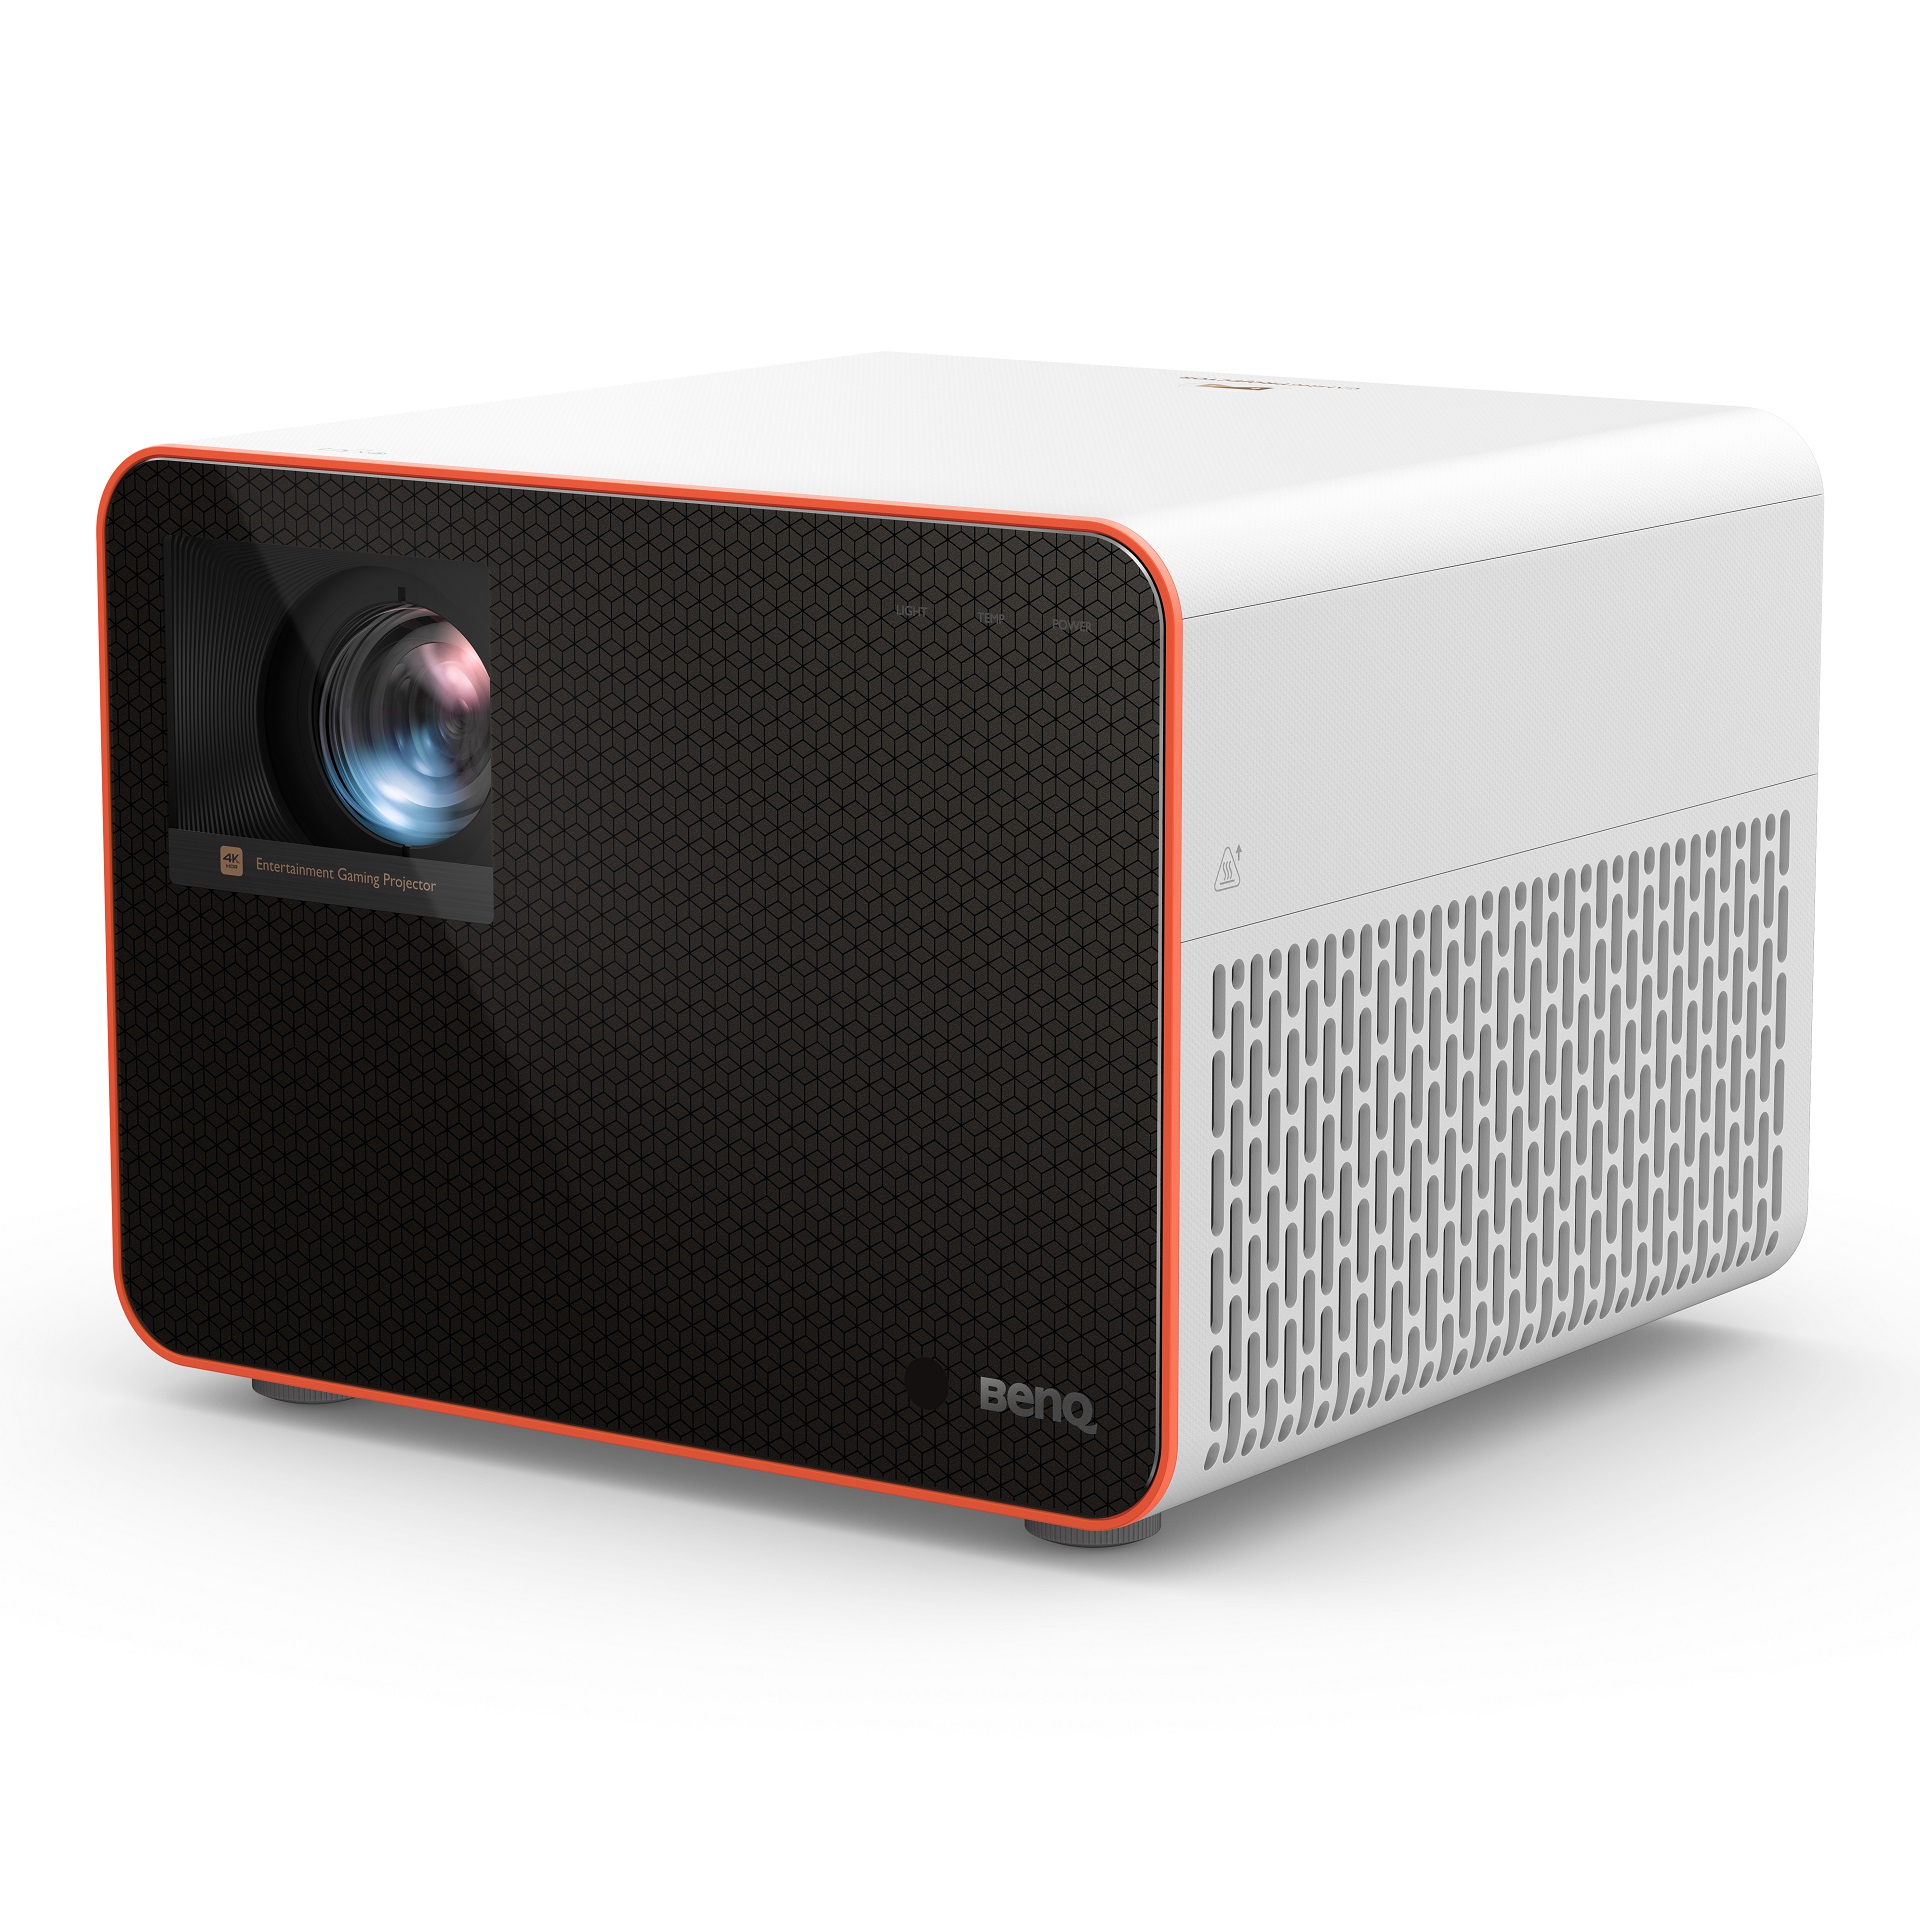 True 4K HDR 4LED Immersive Open World Gaming Projector